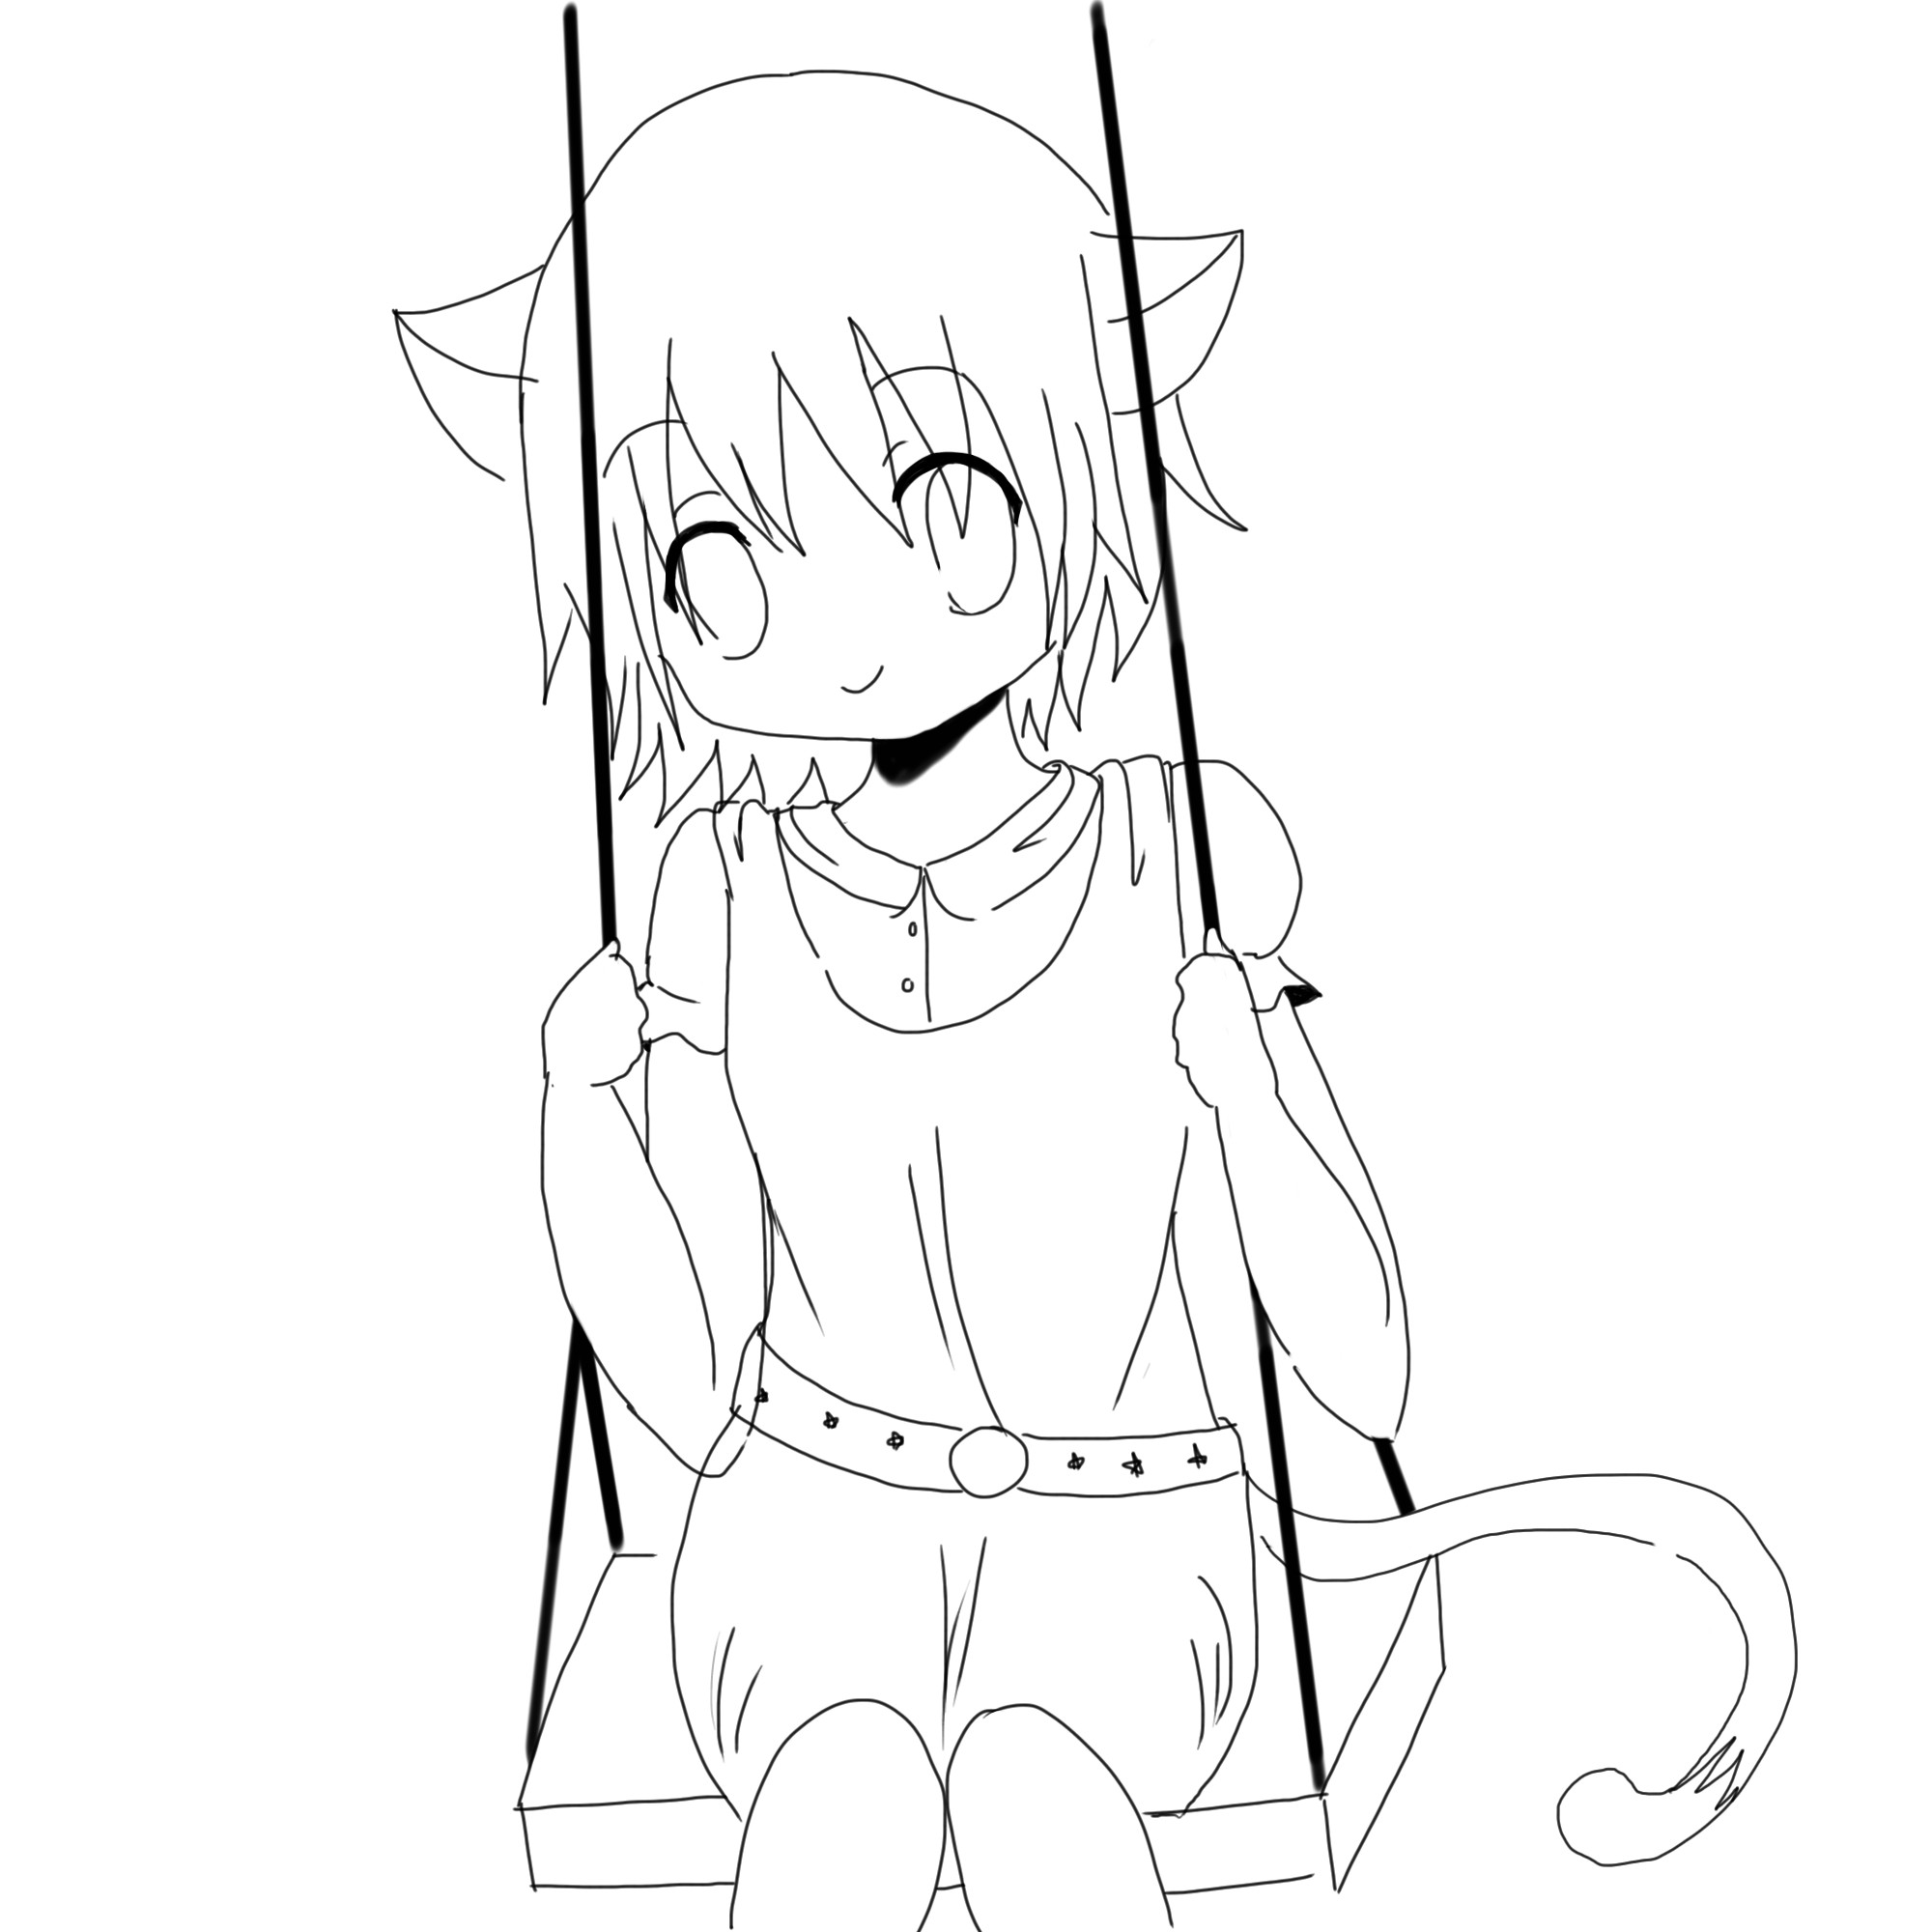 Kawaii Cat Girl Coloring Pages
 Cute Anime Cat Coloring Pages Neko Girl Lineart By